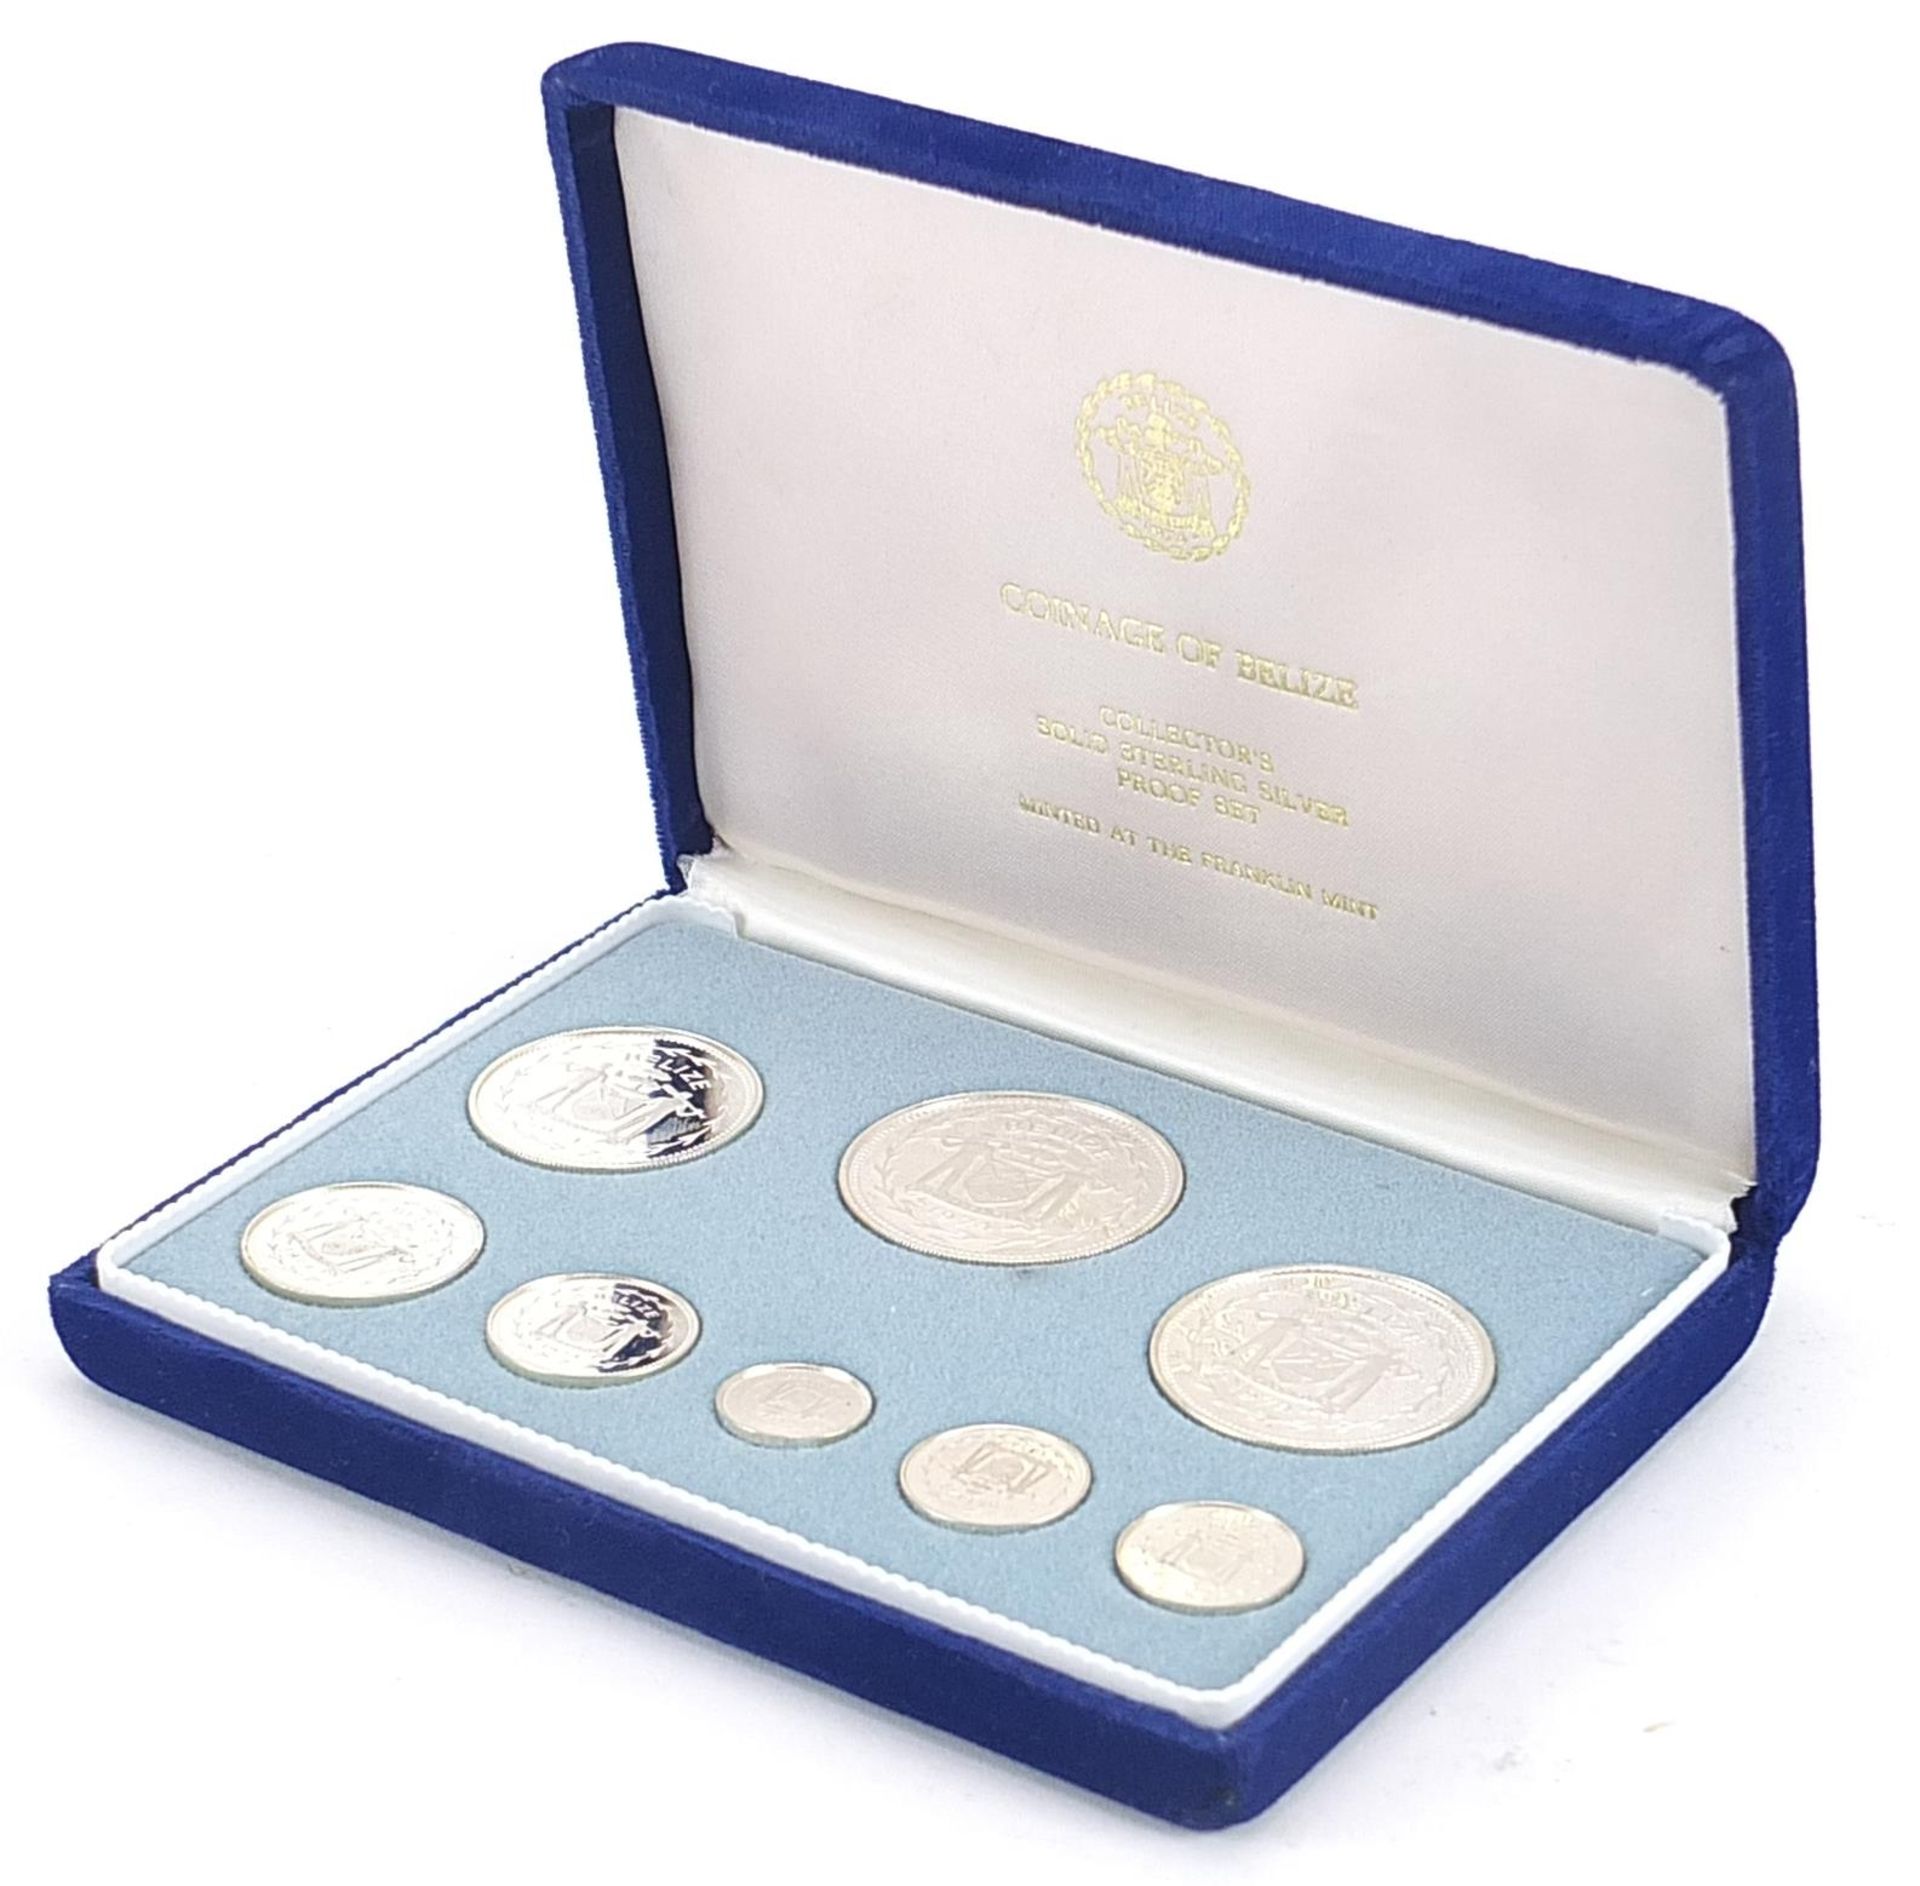 Belize 1974 collector's silver proof set minted at The Franklin Mint, with fitted case, total 102.8g